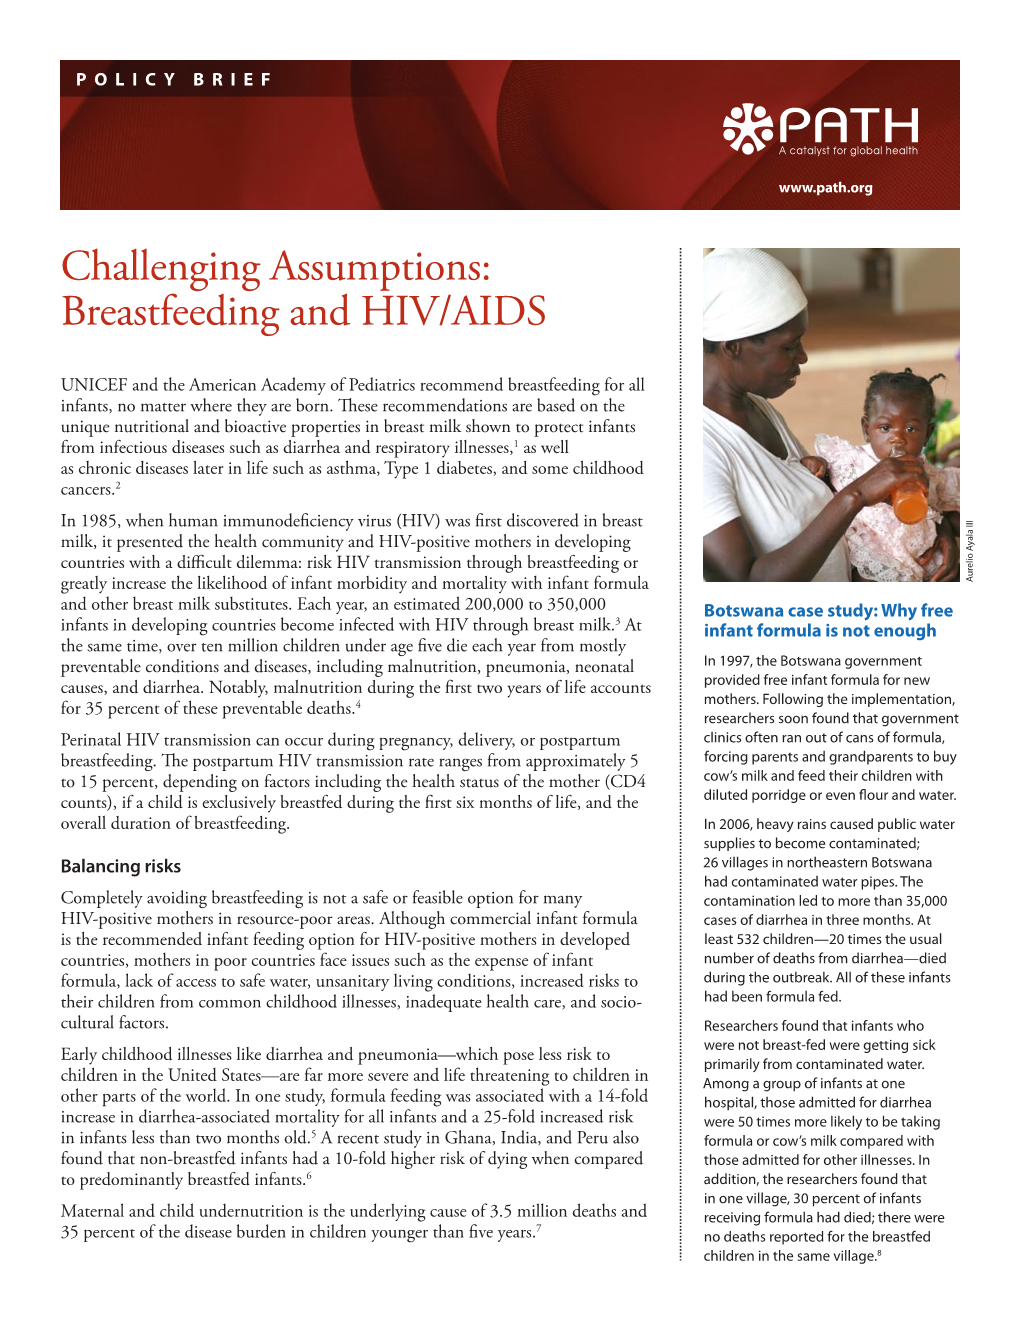 Challenging Assumptions: Breastfeeding and HIV/AIDS